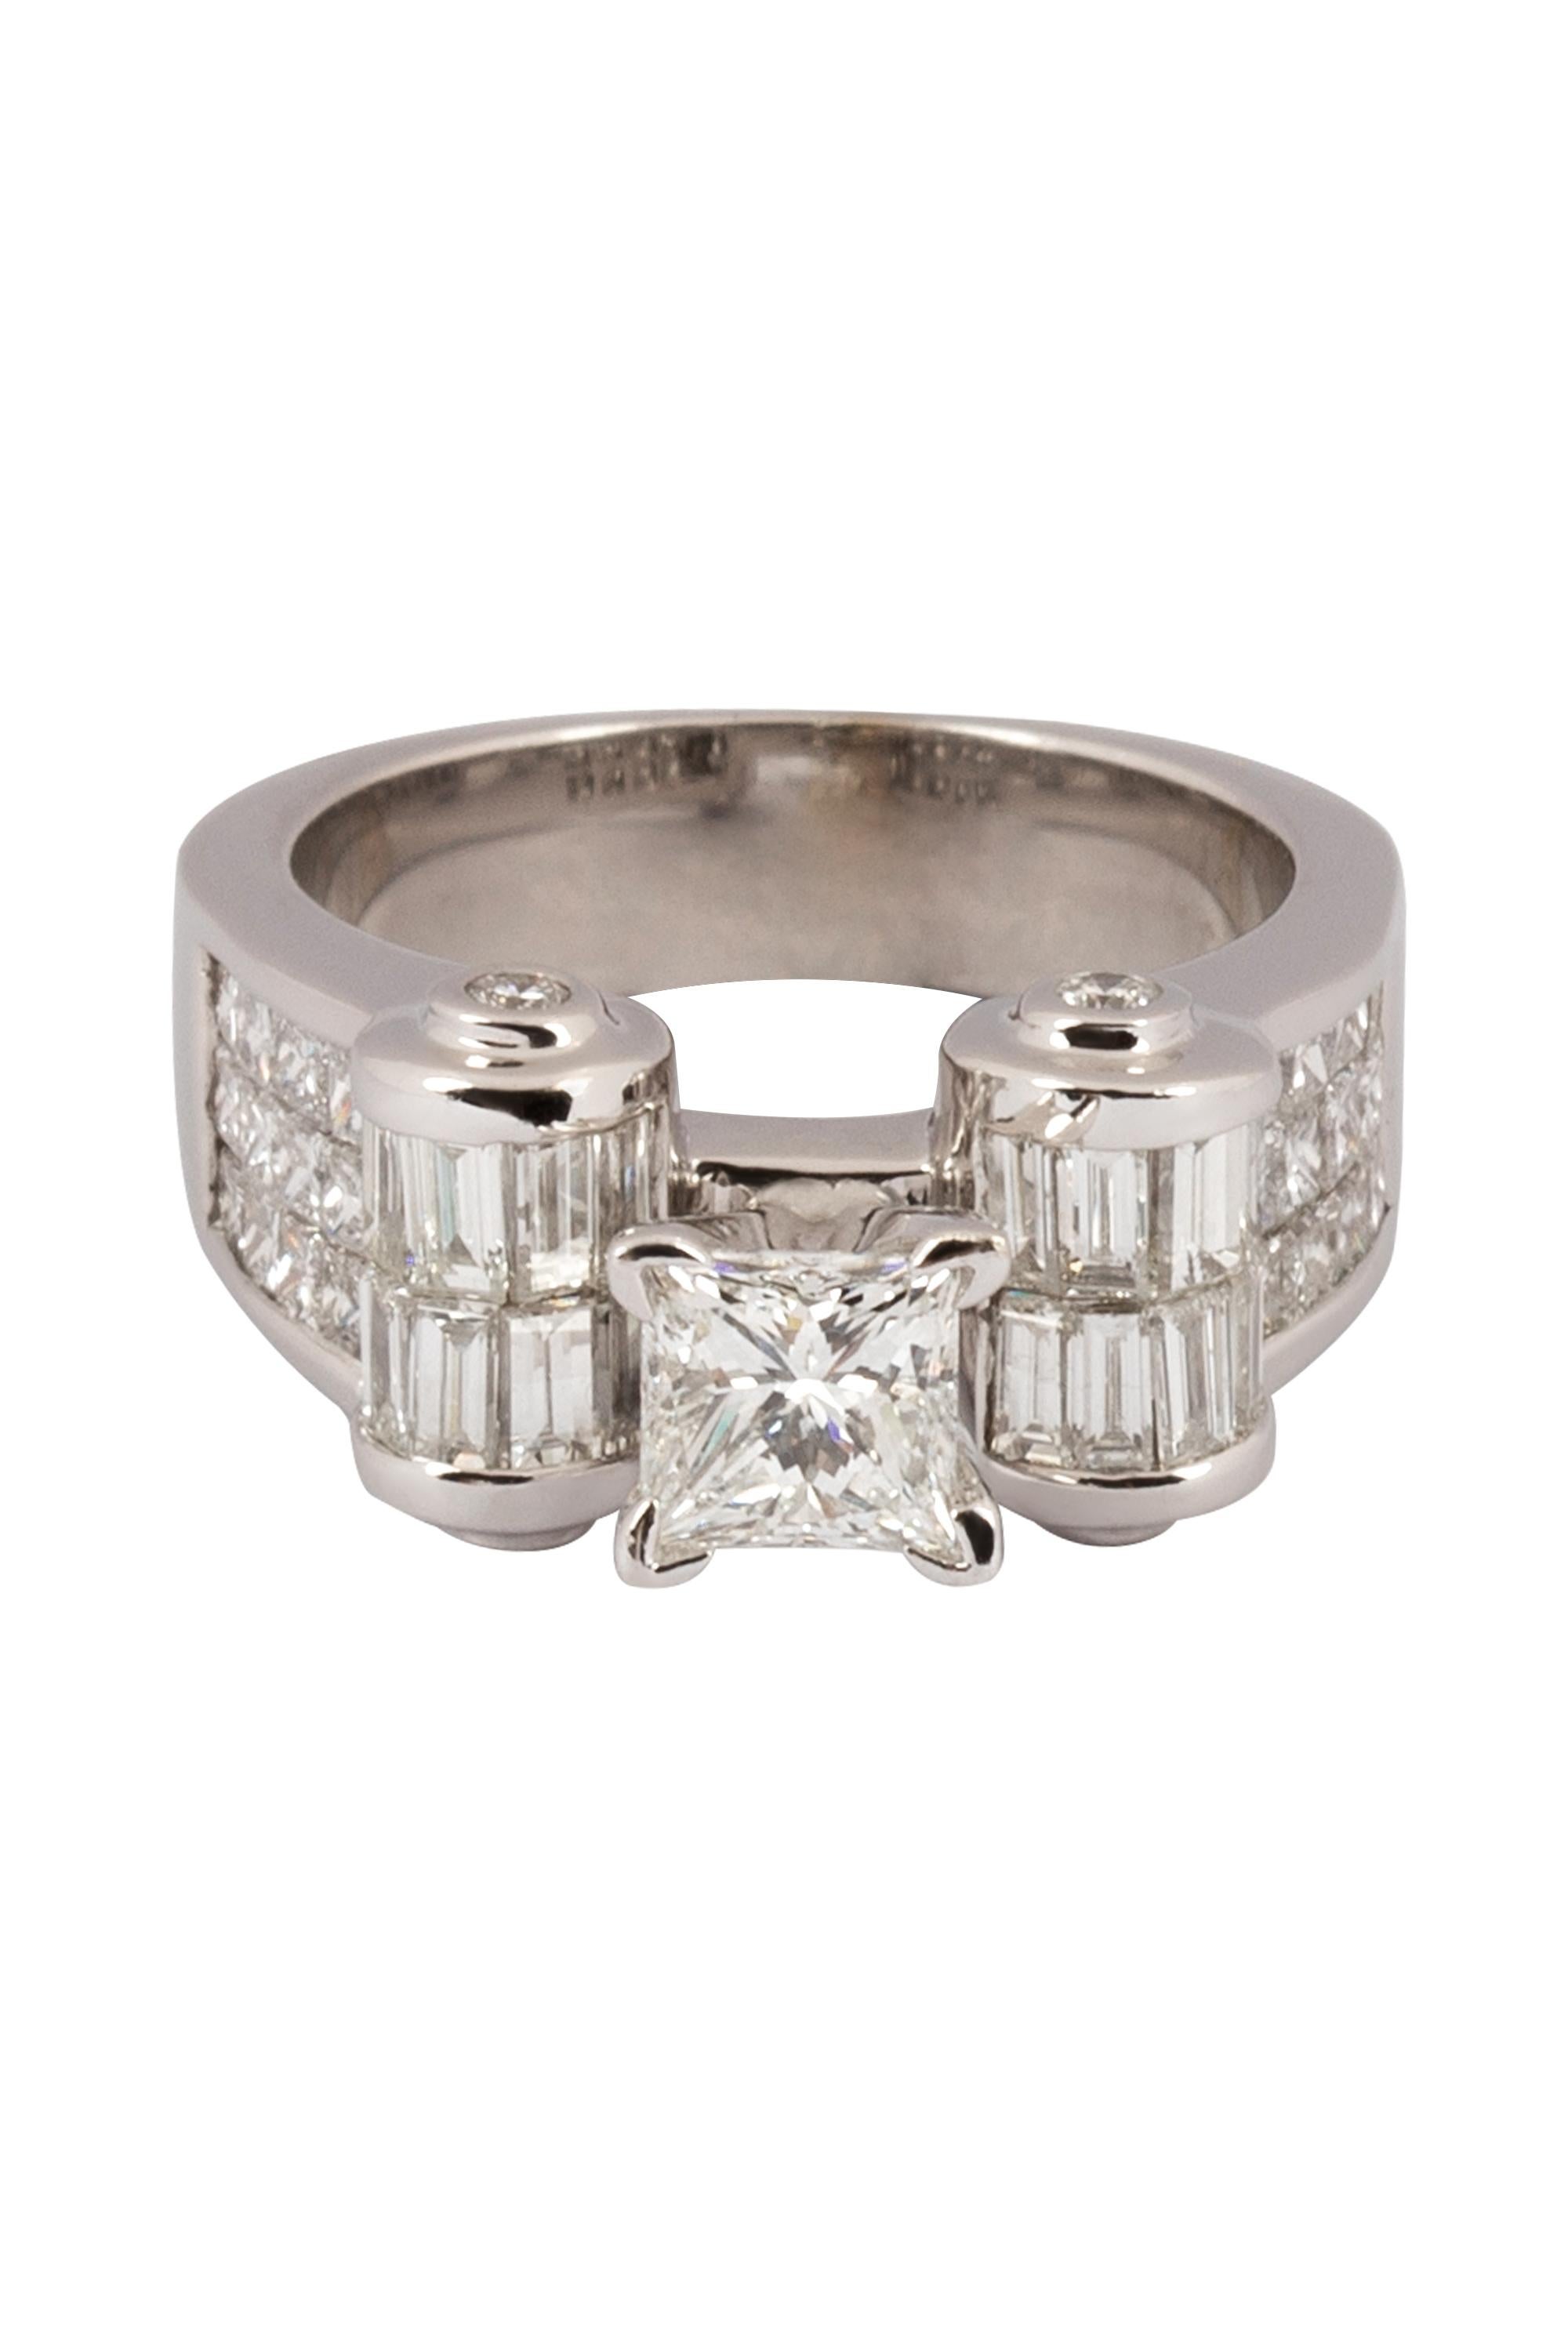 1 Carat Princess Cut Diamond with Approx 2.36 Ctw Diamond Ring In Excellent Condition For Sale In beverly hills, CA